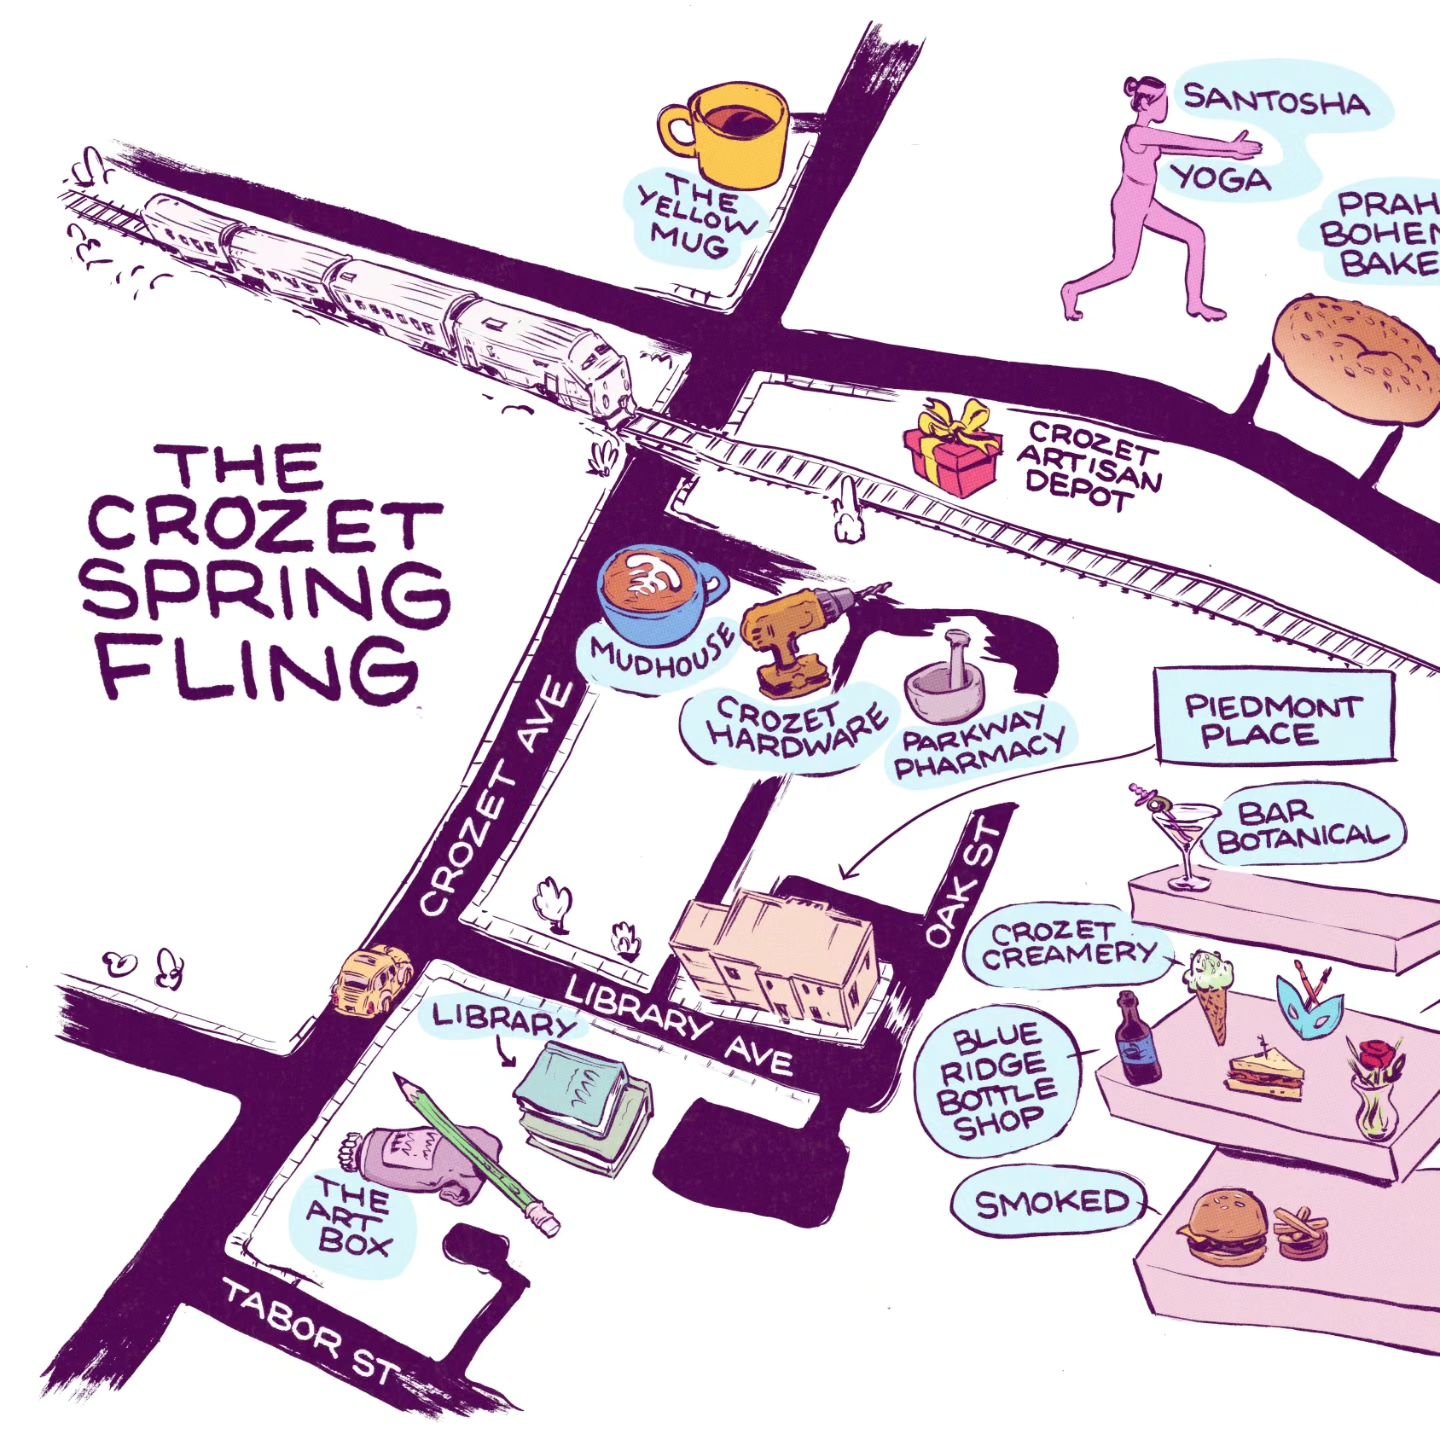 The Crozet Spring Fling is this Saturday!

Check out this incredible map by @aaimiller detailing each participant's offerings ❤️ Pick one up along with a passport at the first business you visit on Saturday morning.

I'm excited to offer a gift baske